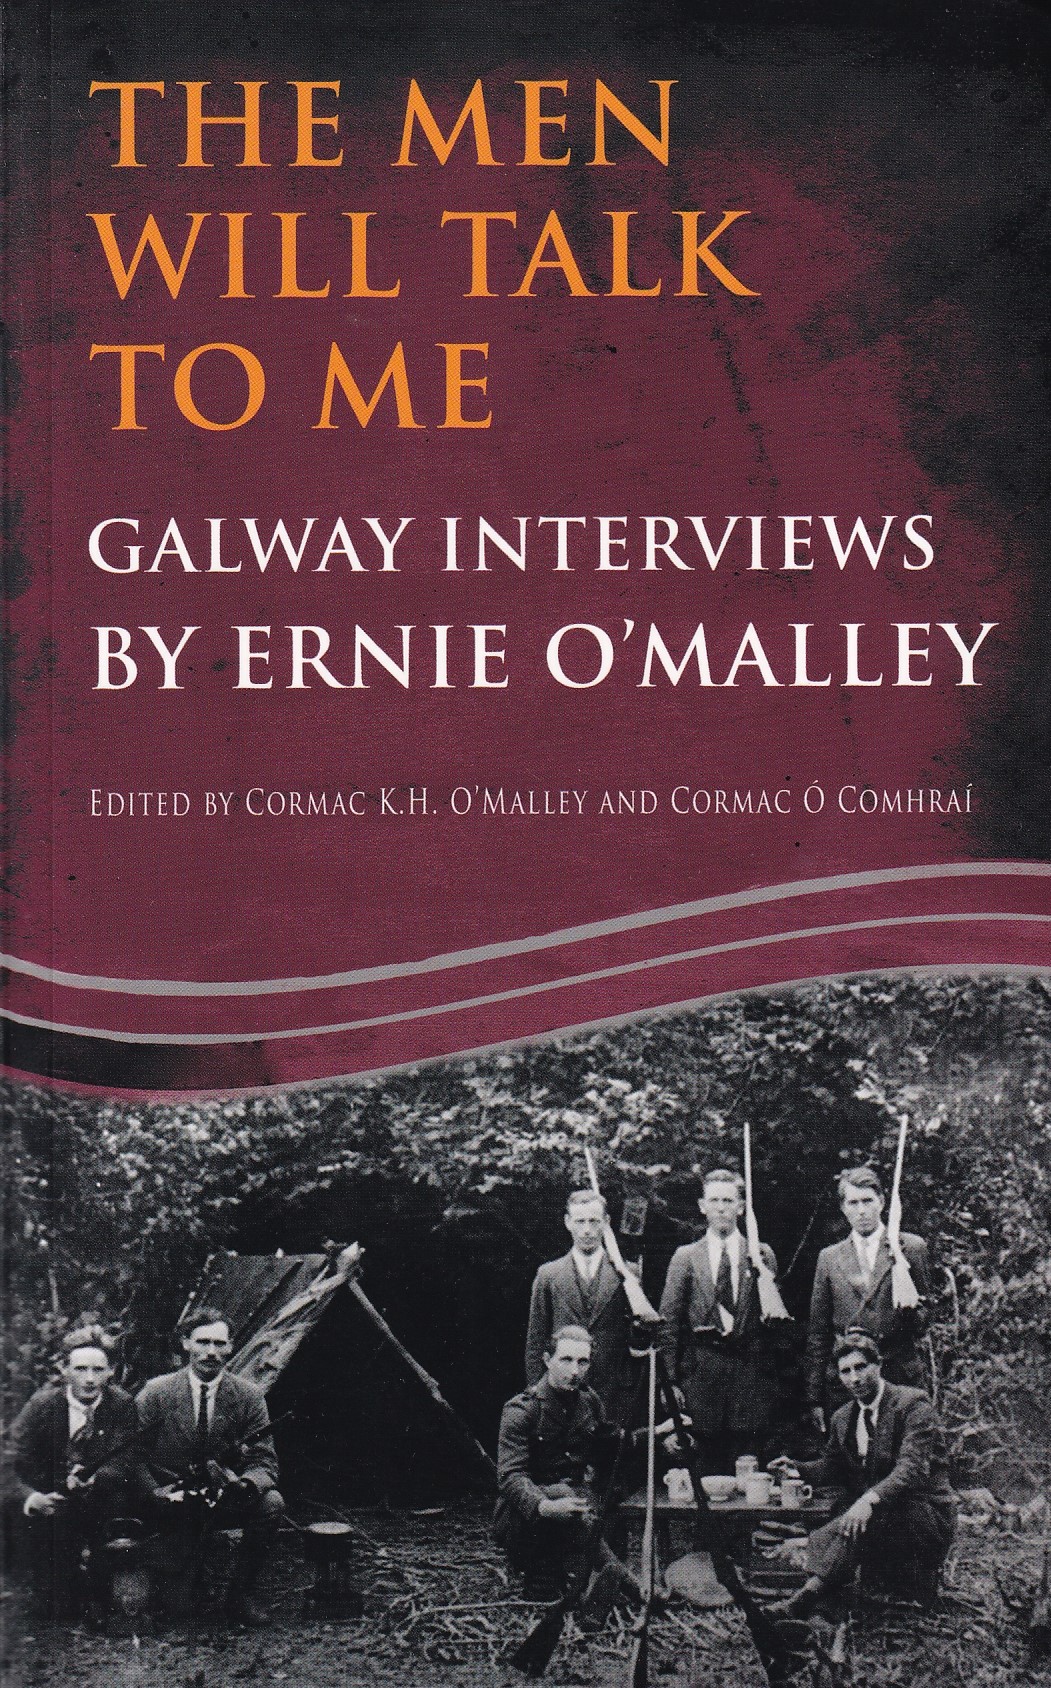 The Men Will Talk to Me: Galway Interviews by Ernie O’Malley | Ernie O'Malley (eds. Cormac K. H. O'Malley & Cormac Ó Comhraí) | Charlie Byrne's